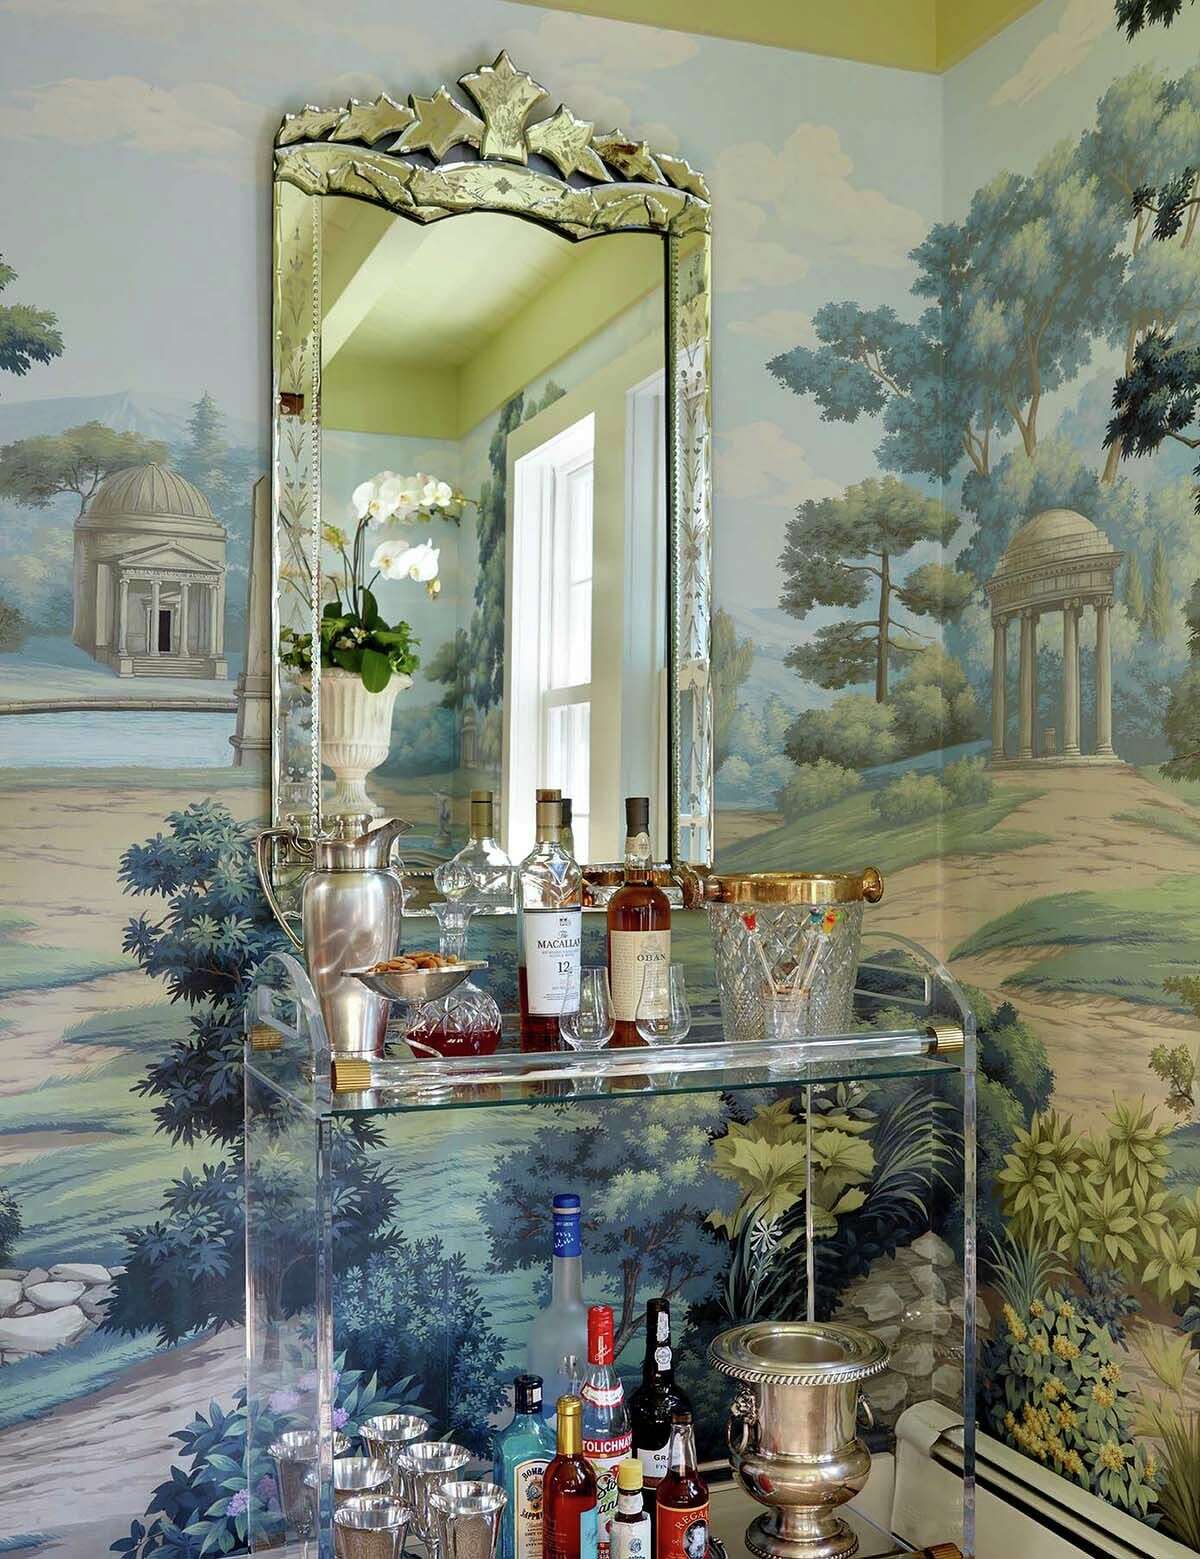 Grandiose wallpaper and an ornate framed mirror? Grandma might like it, though she’d probably say to go easy on the sauce.